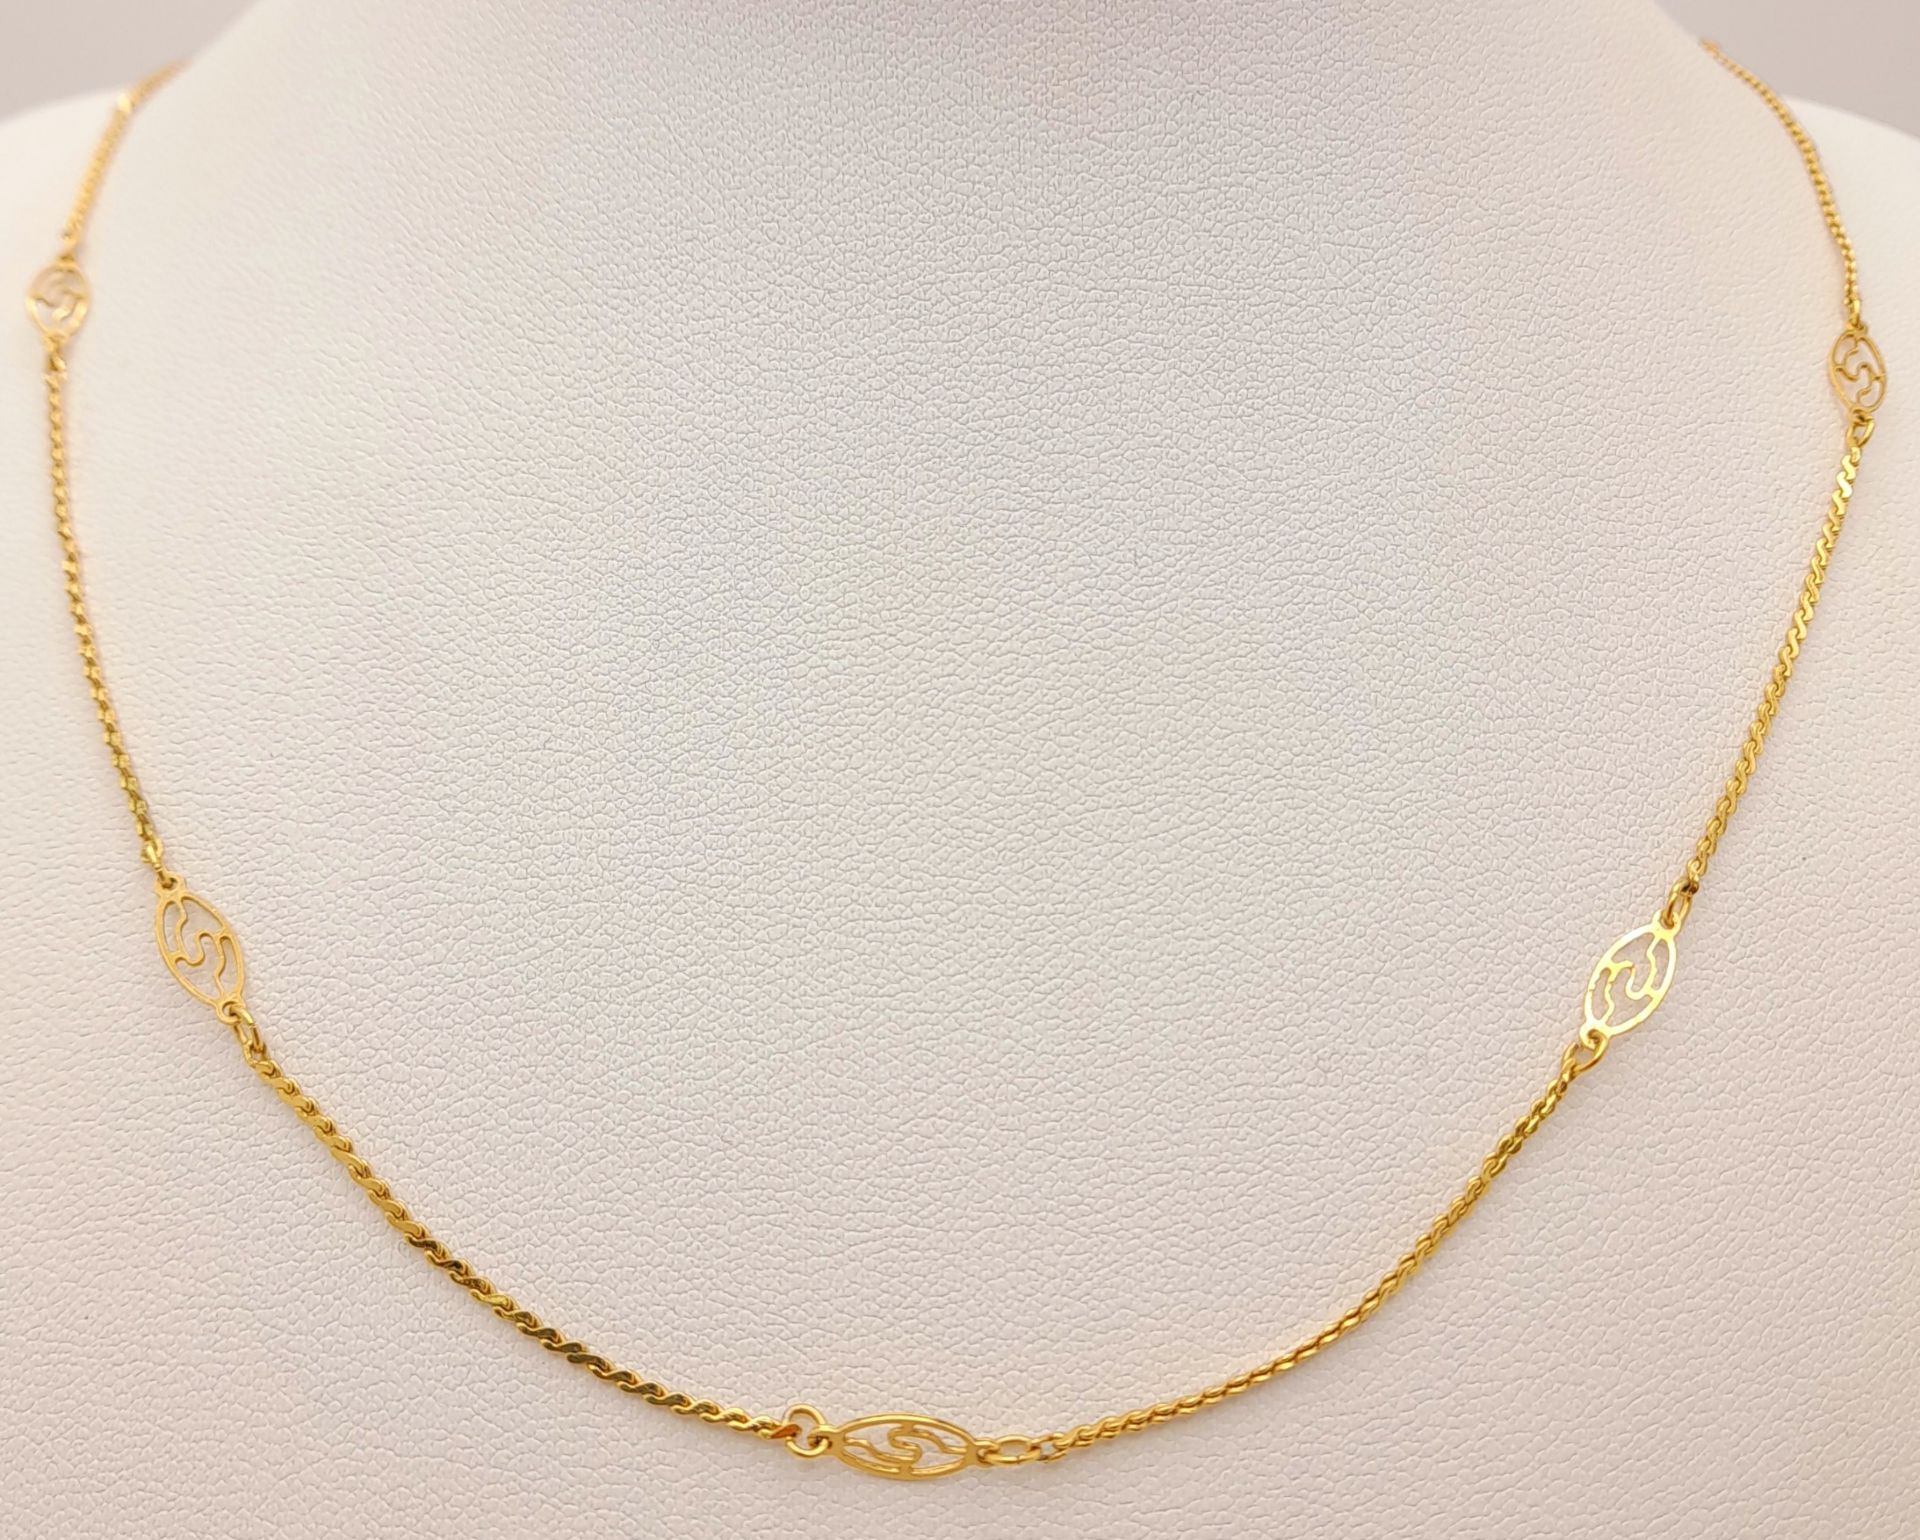 A 9 K yellow gold fancy chain necklace , length: 47 cm, weight: 2.4 g.